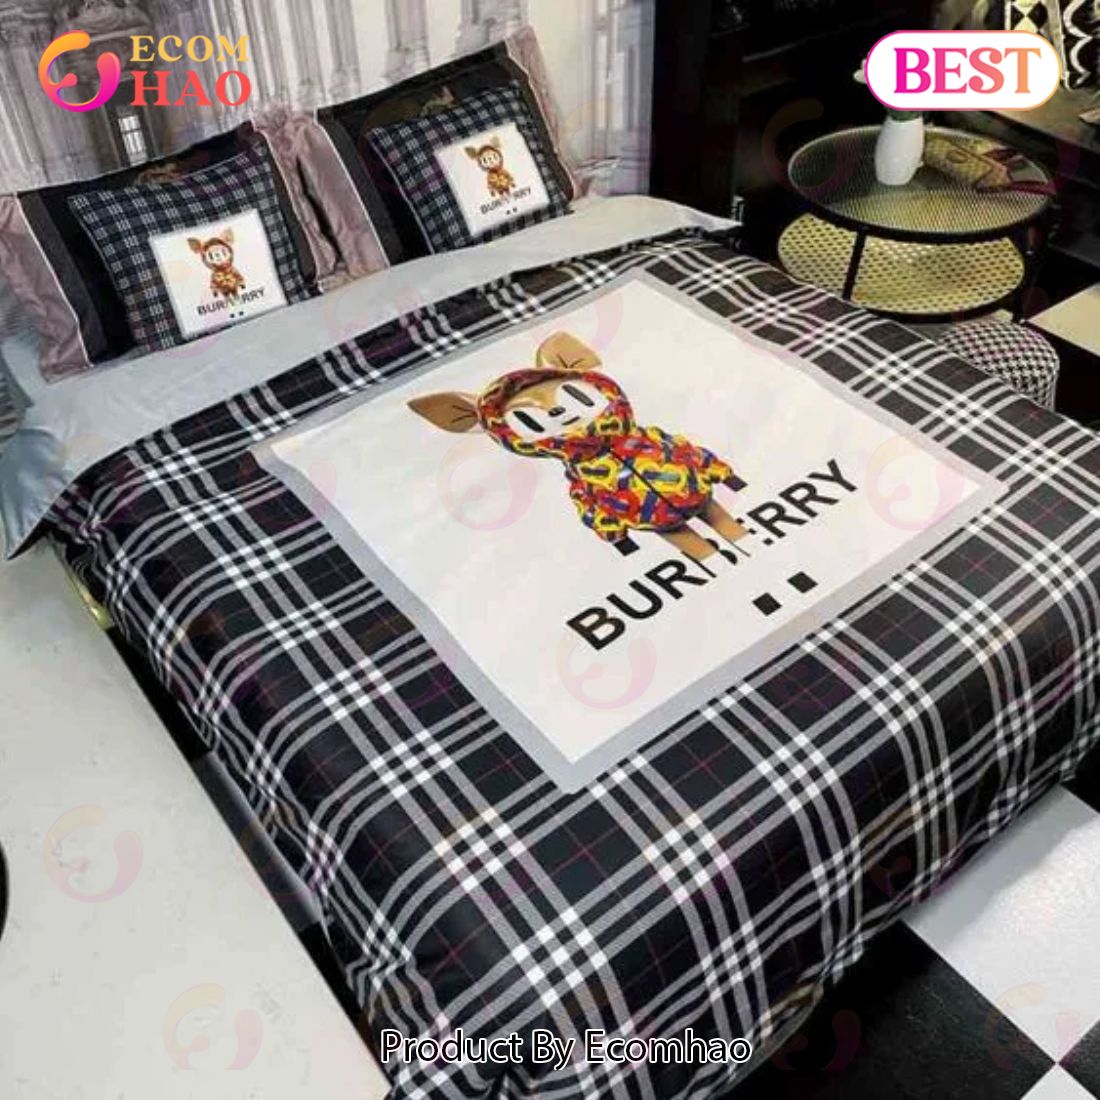 Burberry Luxury Brand High-End Bedding Set Home Decorations For Home Best Luxury Bed Sets Gift